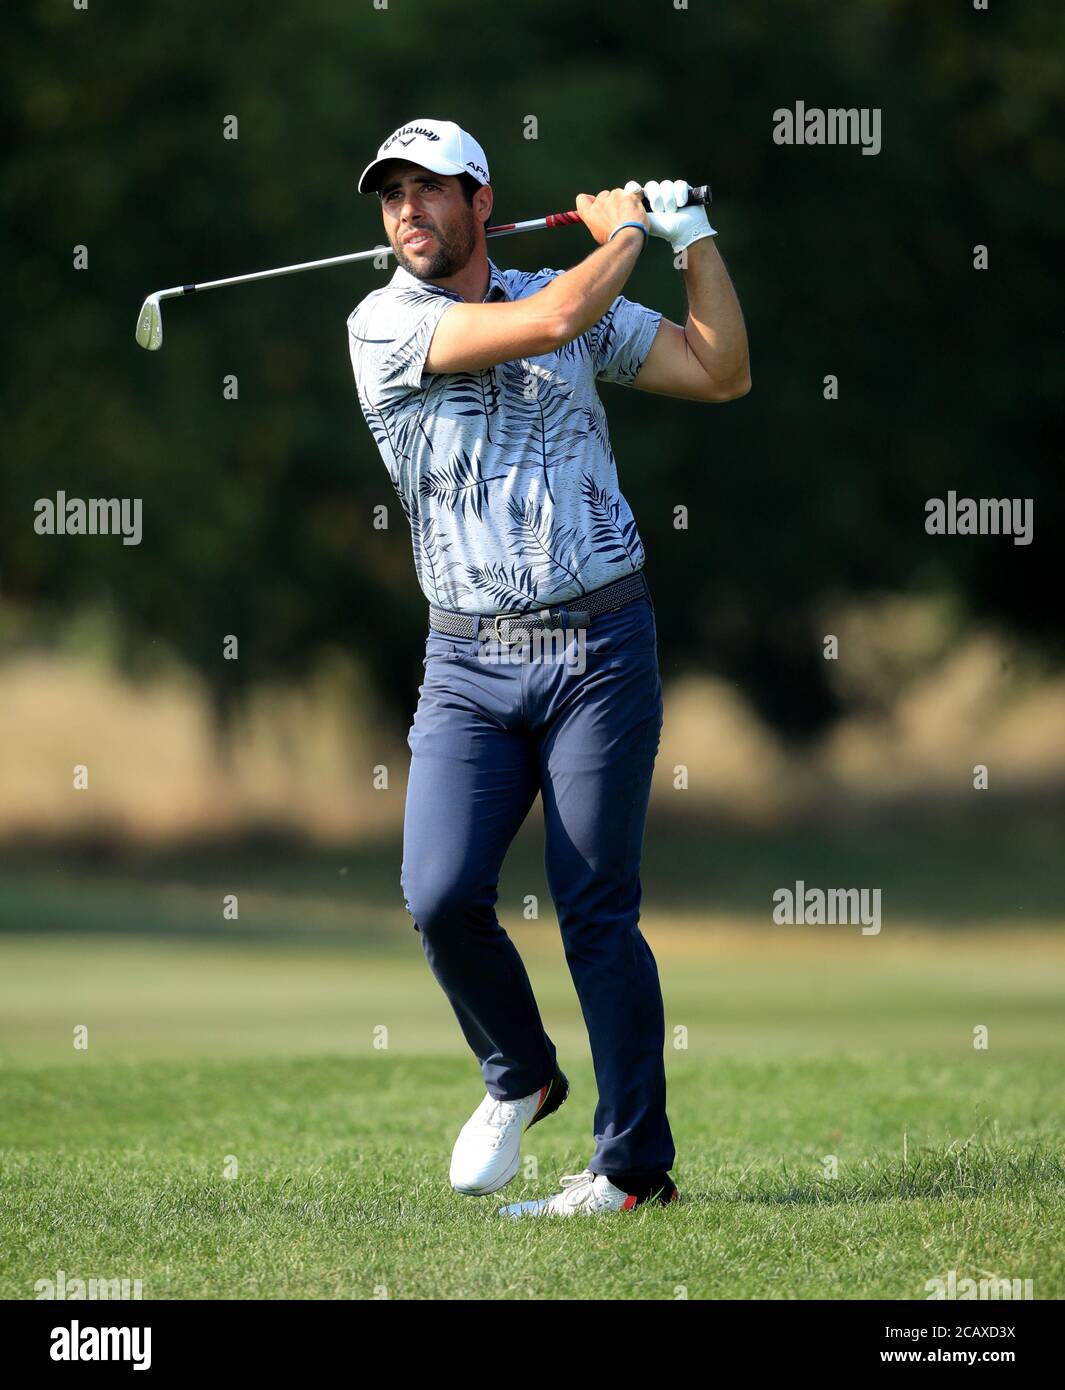 Spain's Adrian Otaegui during day four of the English Championship at Hanbury Manor Marriott Hotel and Country Club, Hertfordshire. Sunday August 9, 2020. See PA story Golf Ware. Photo credit should read: Adam Davy/PA Wire. RESTRICTIONS: Editorial Use, No Commercial Use. Stock Photo